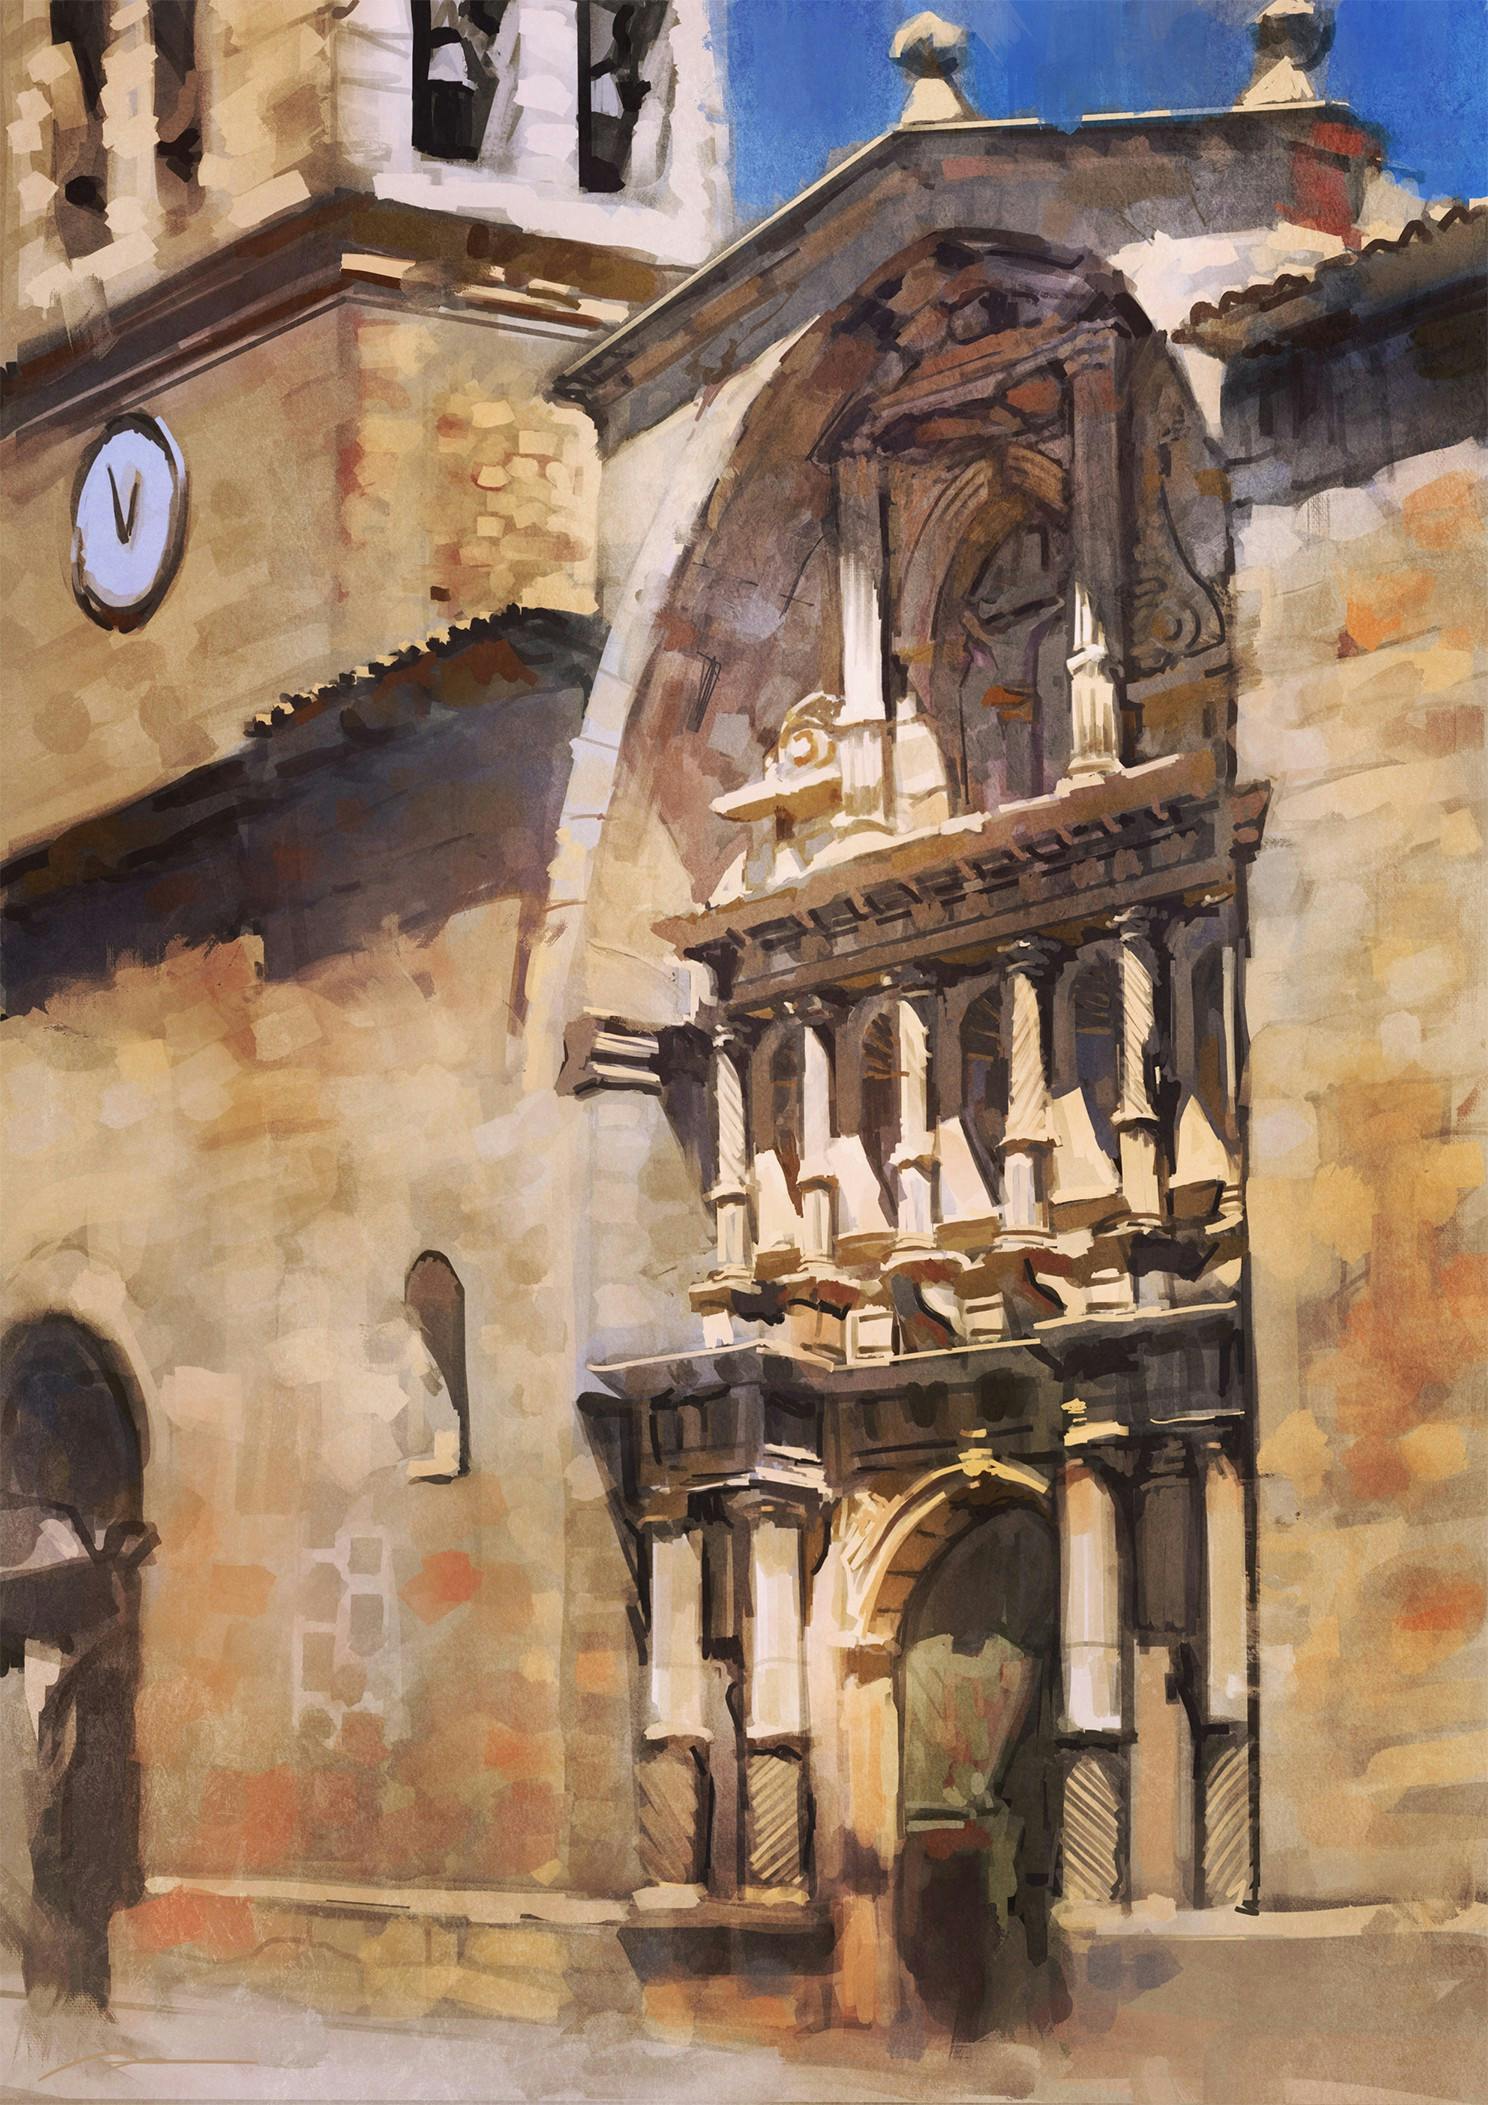 Painting of an ancient building